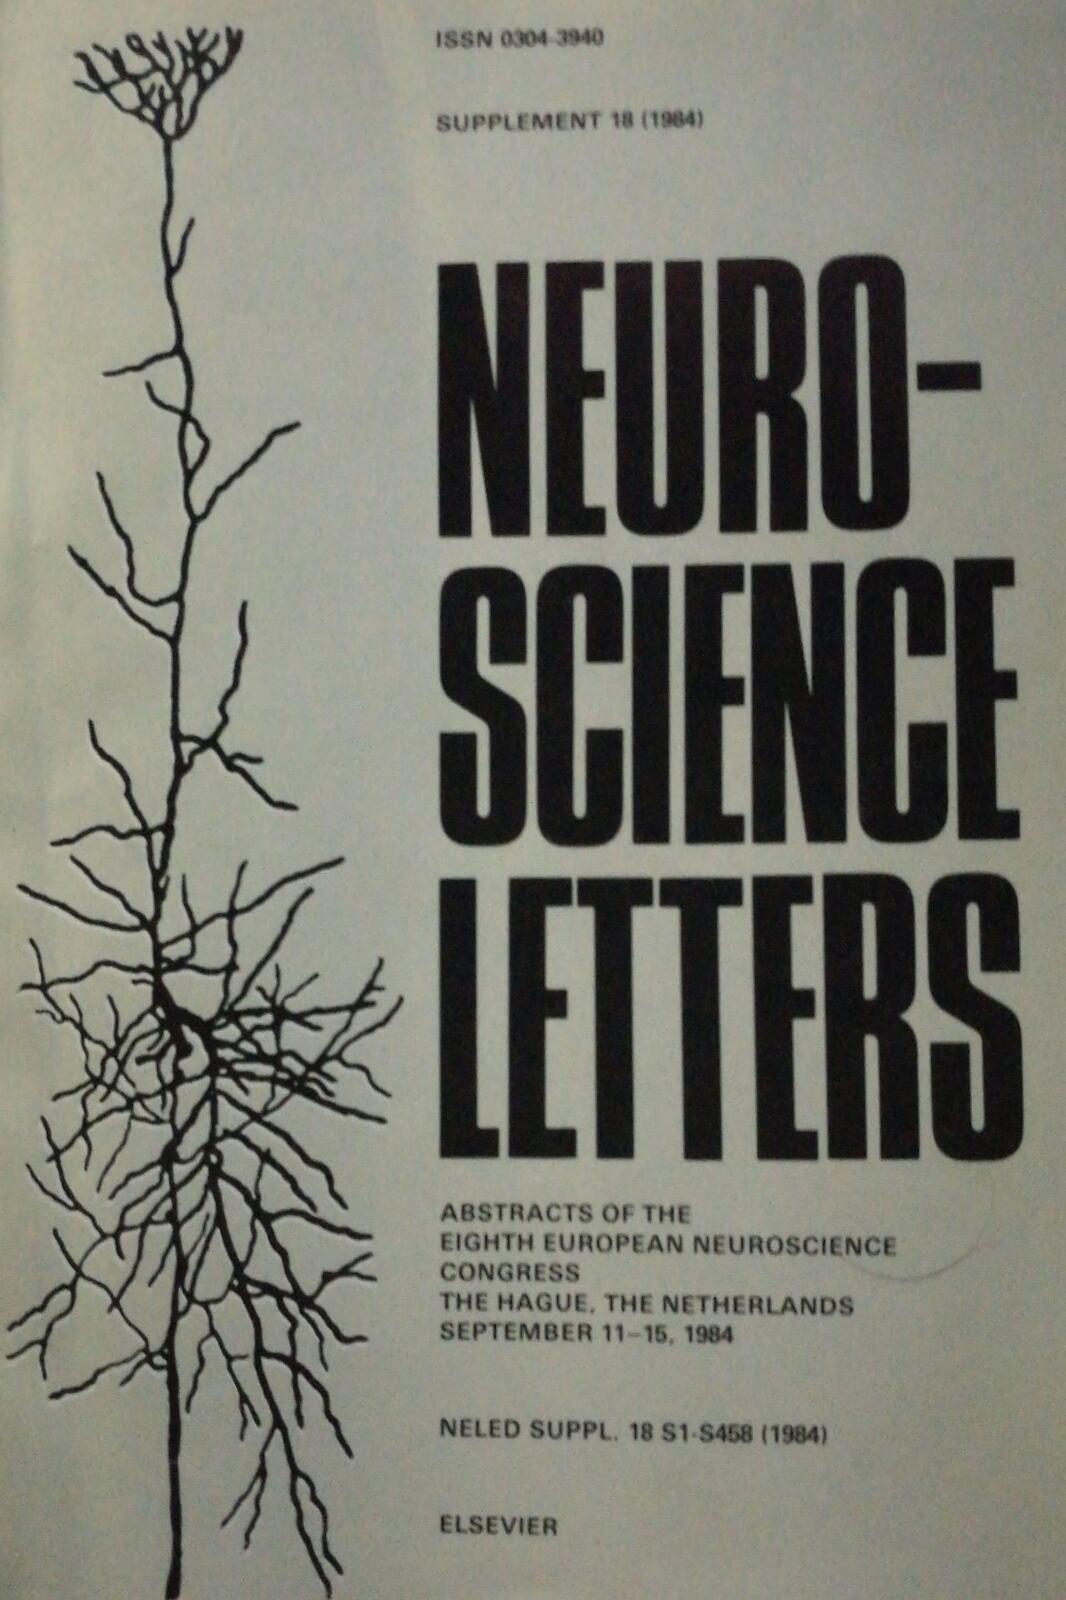 Neuro-Science Letters - Aa. Vv. - 1984 - Elsevier - lo